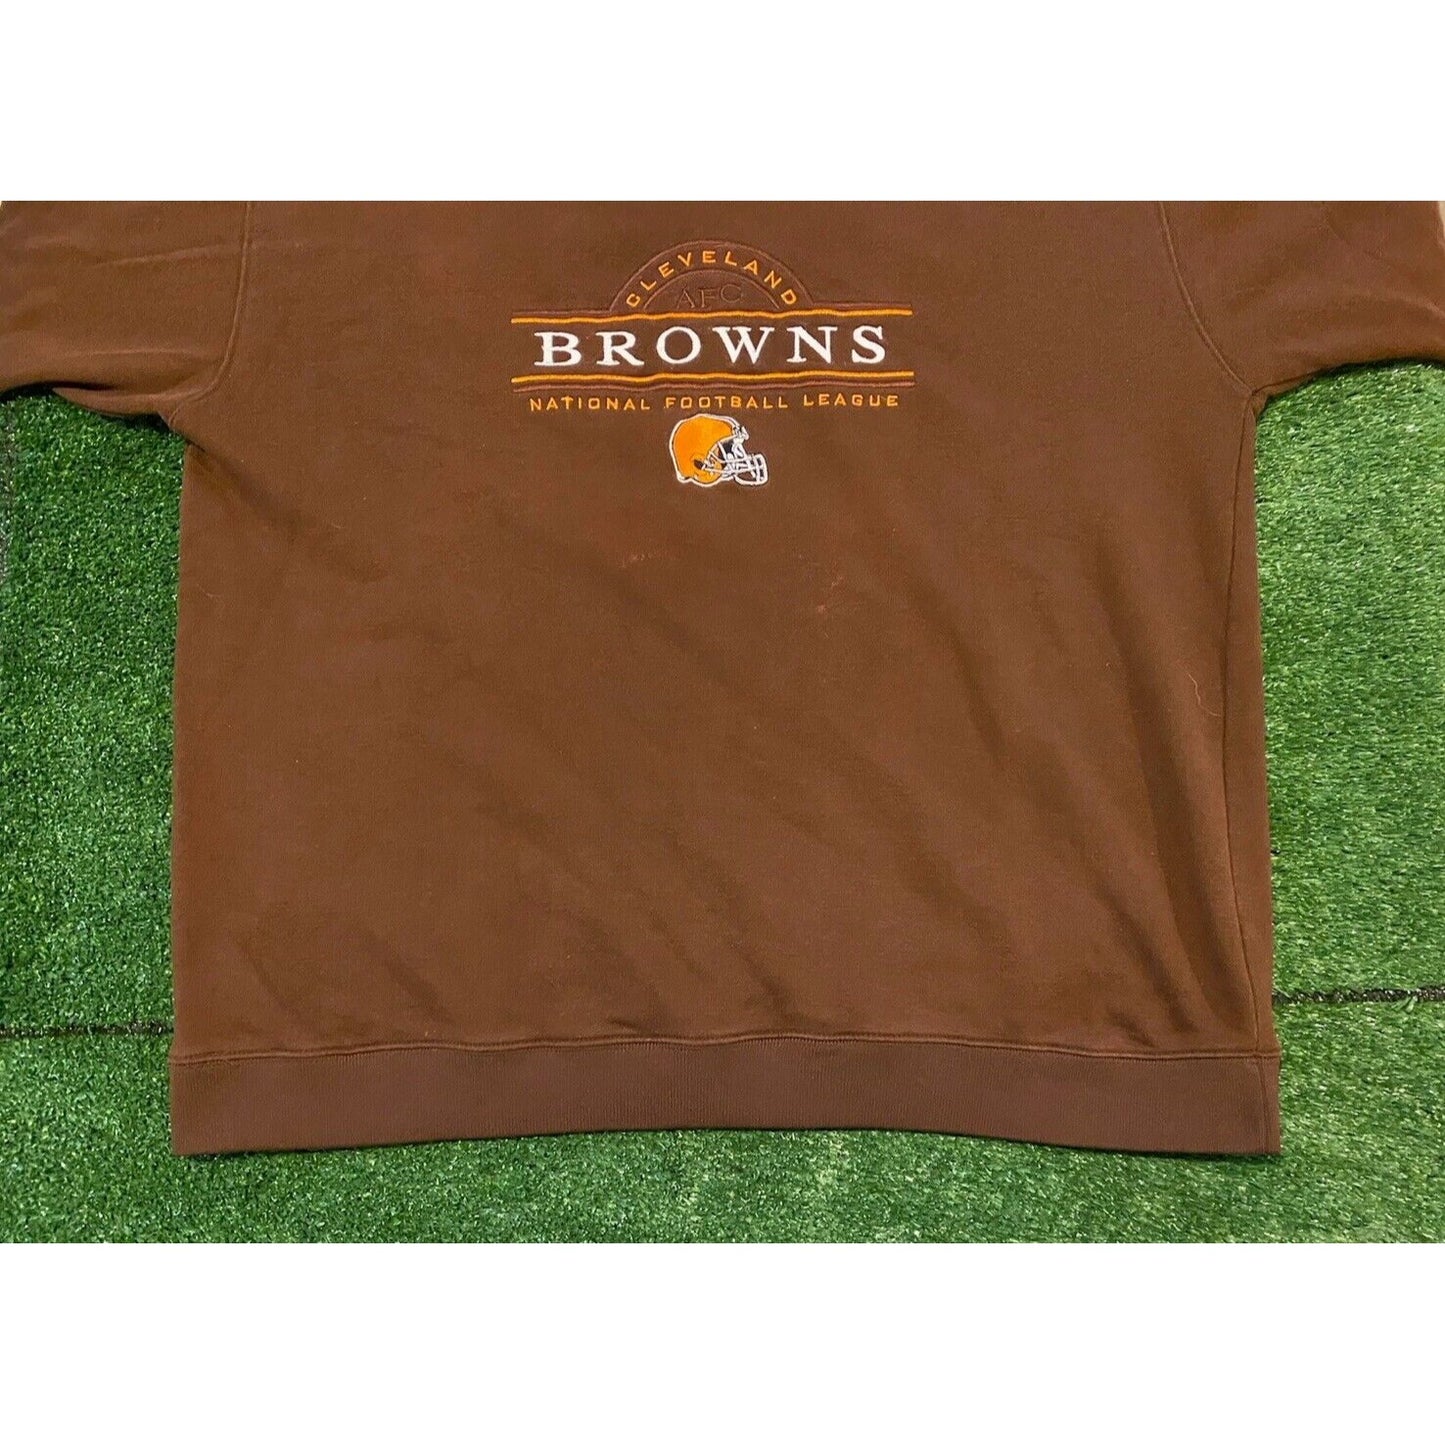 Vintage Cleveland Browns sweatshirt extra large Pro Player brown 90s crew neck